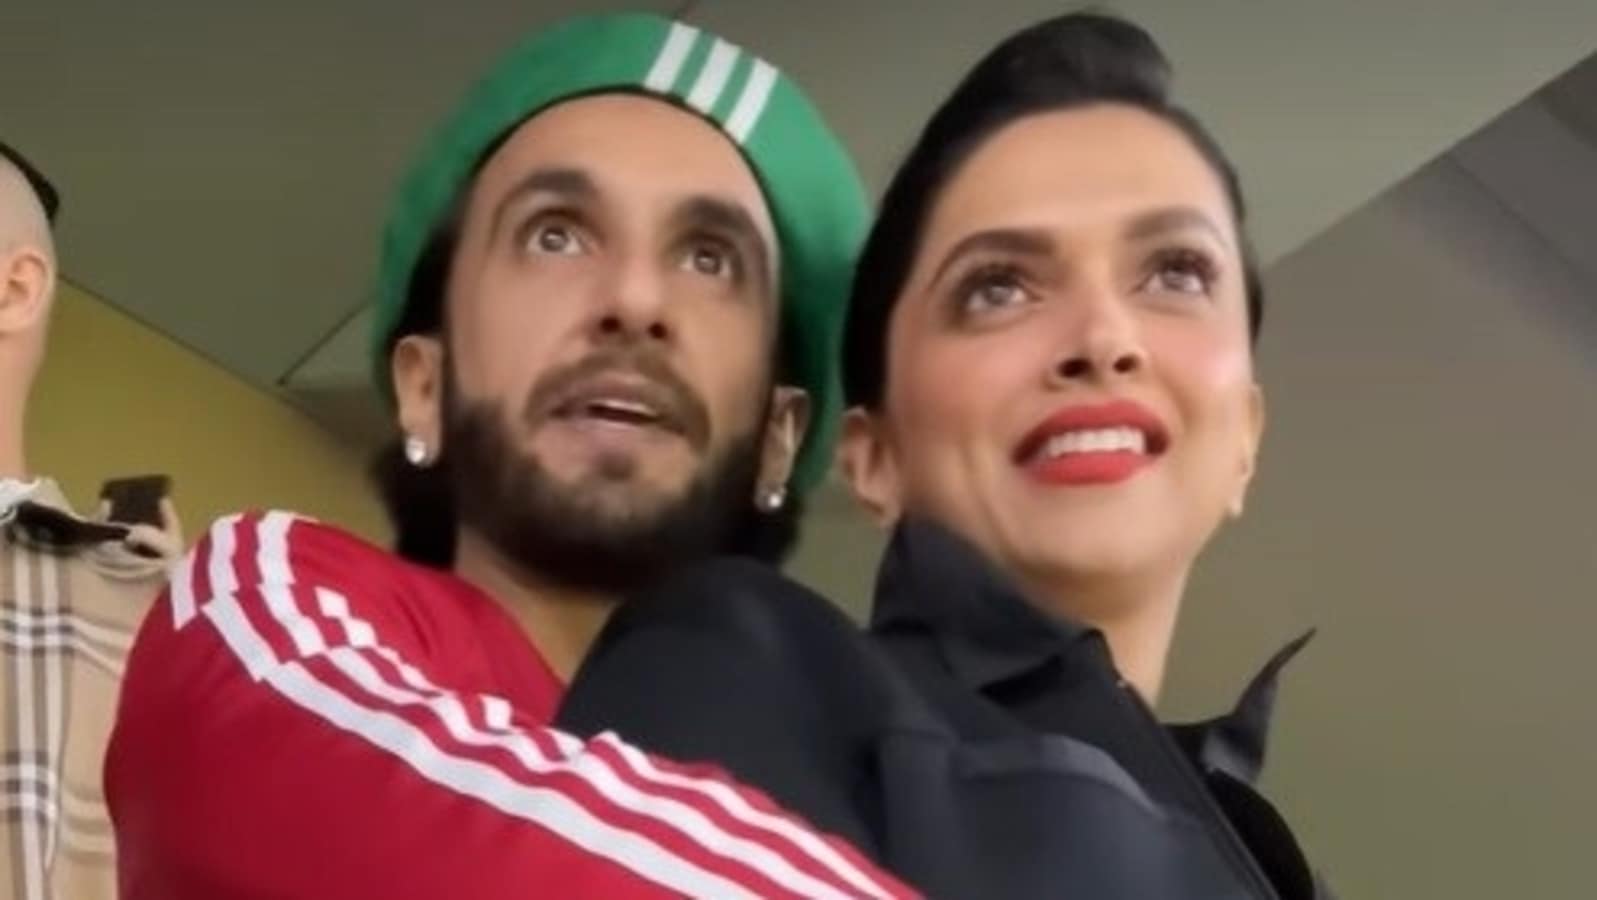 It's really comfortable': Deepika Padukone on her look for unveiling the  FIFA World Cup trophy